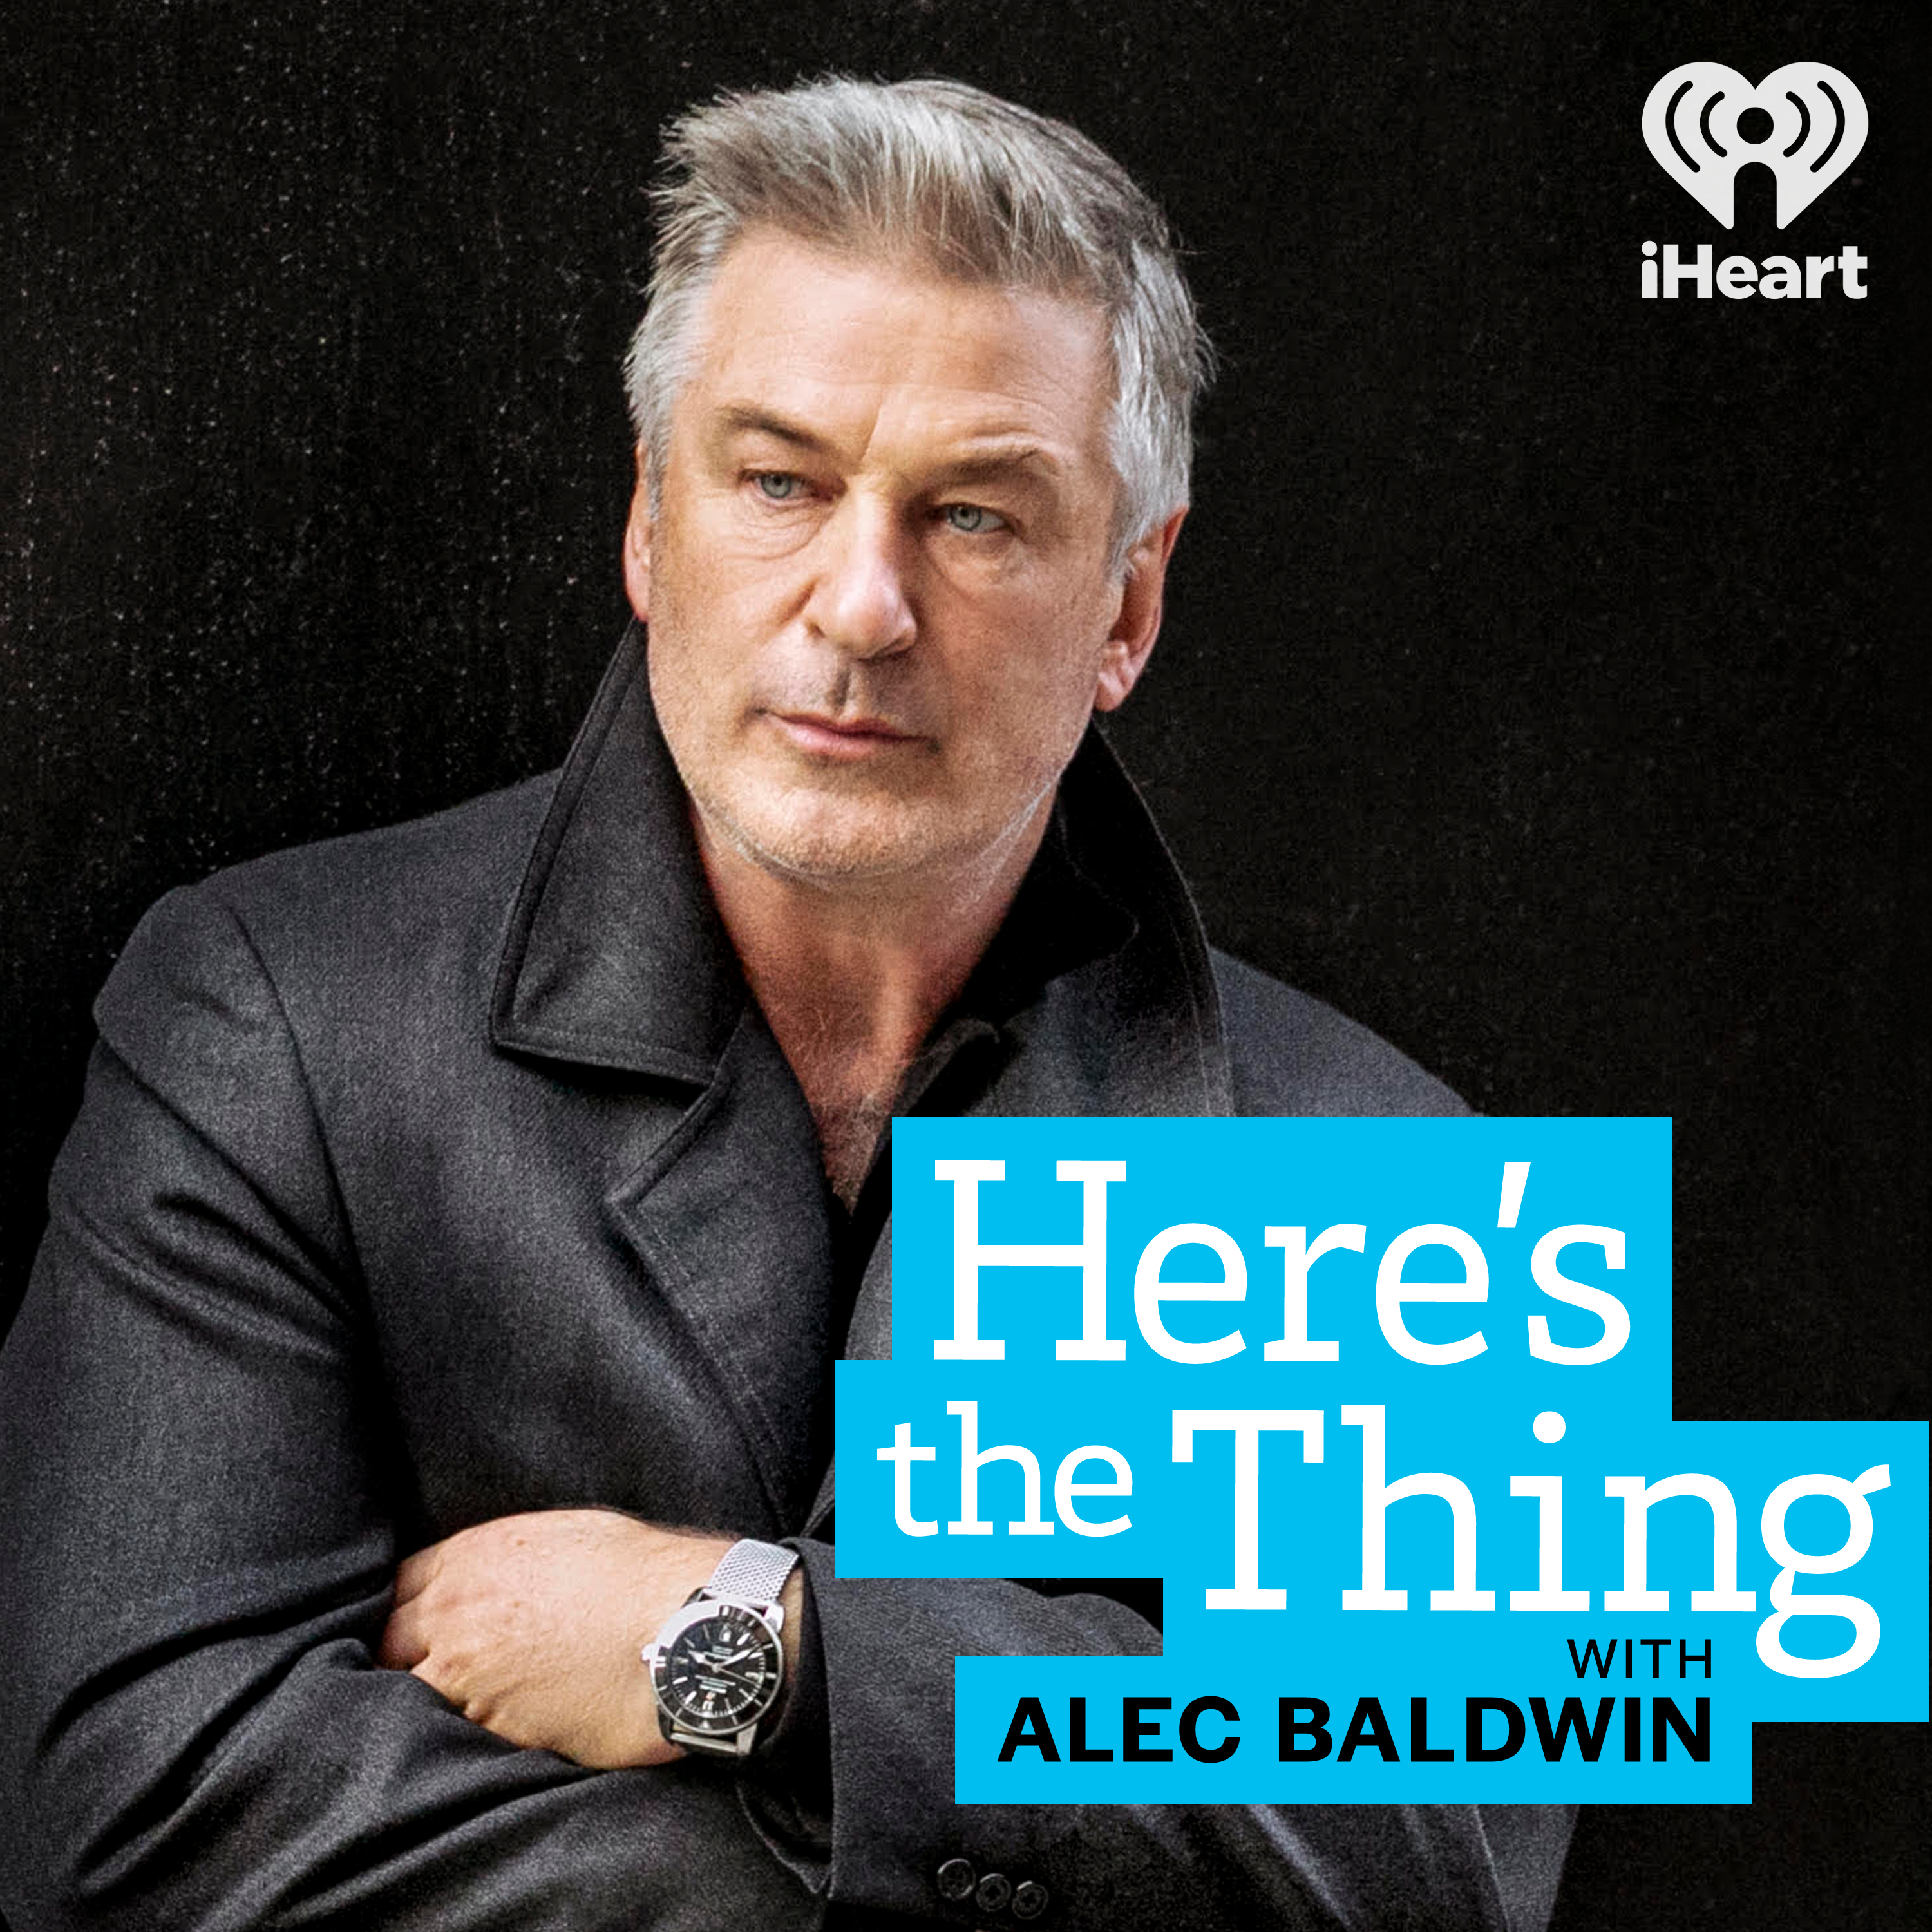 Brian Lehrer Comes to Here's the Thing